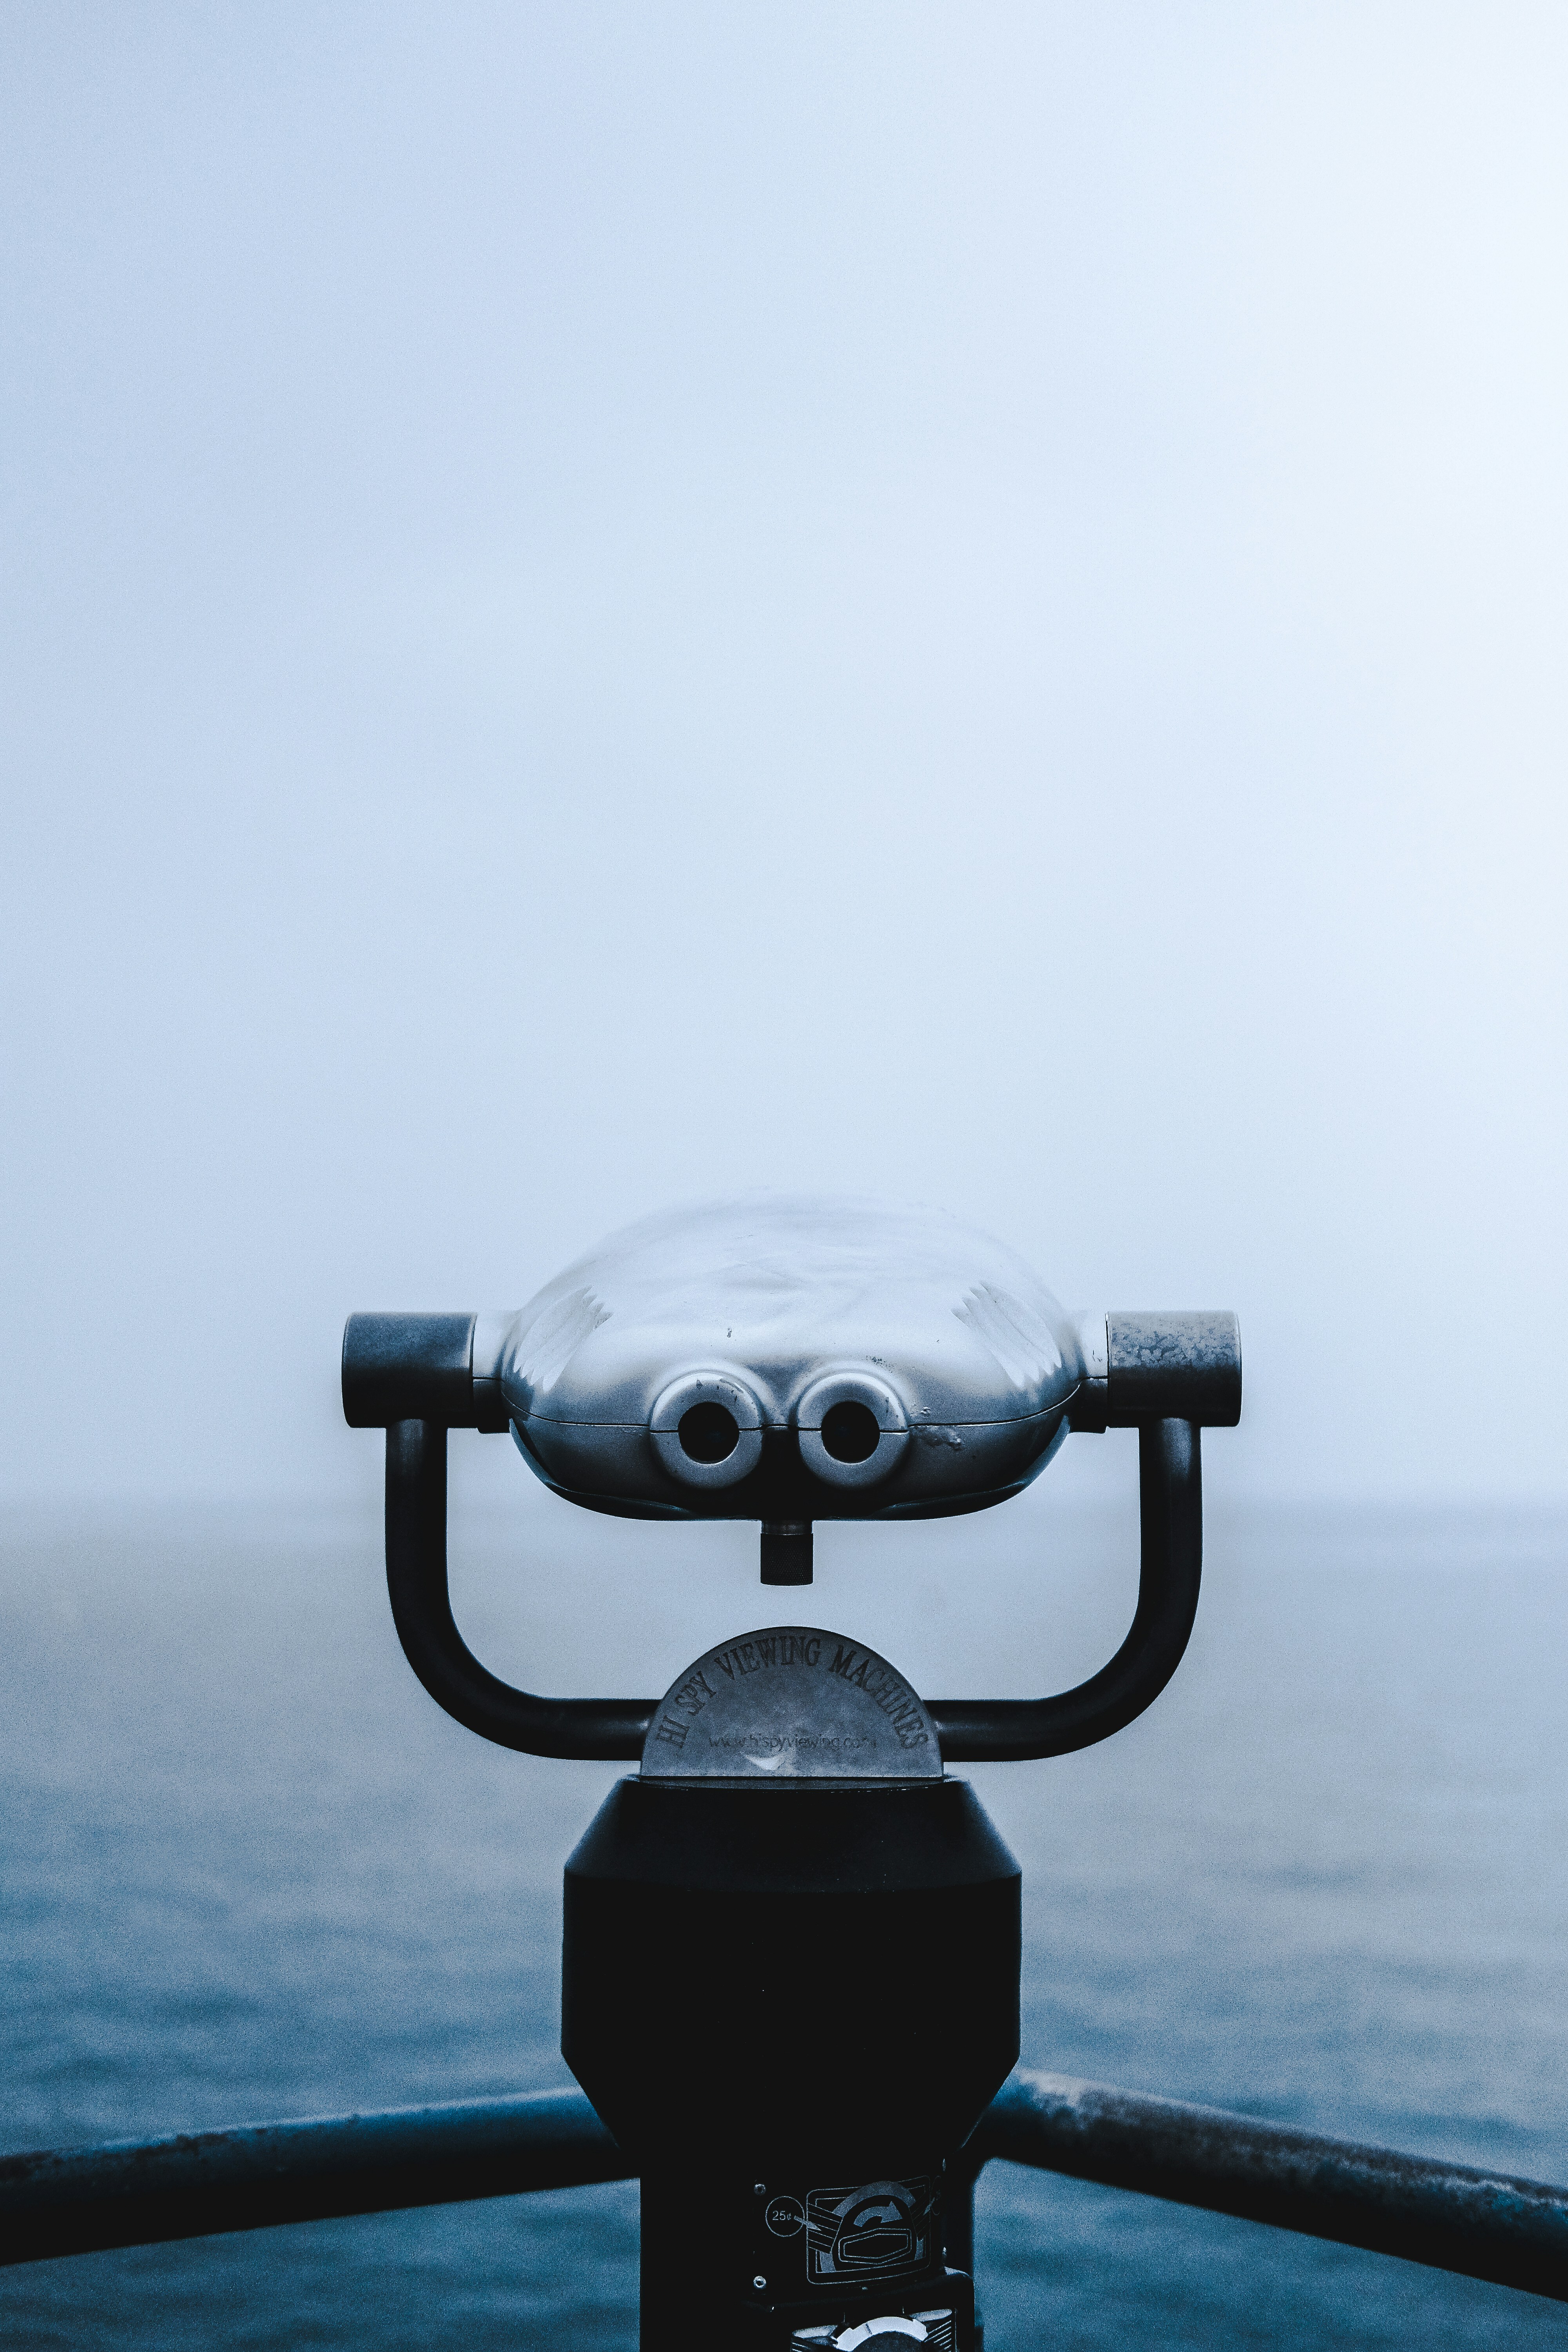 Tower viewer looking out to sea. Photo by Drew Graham on unsplash.com